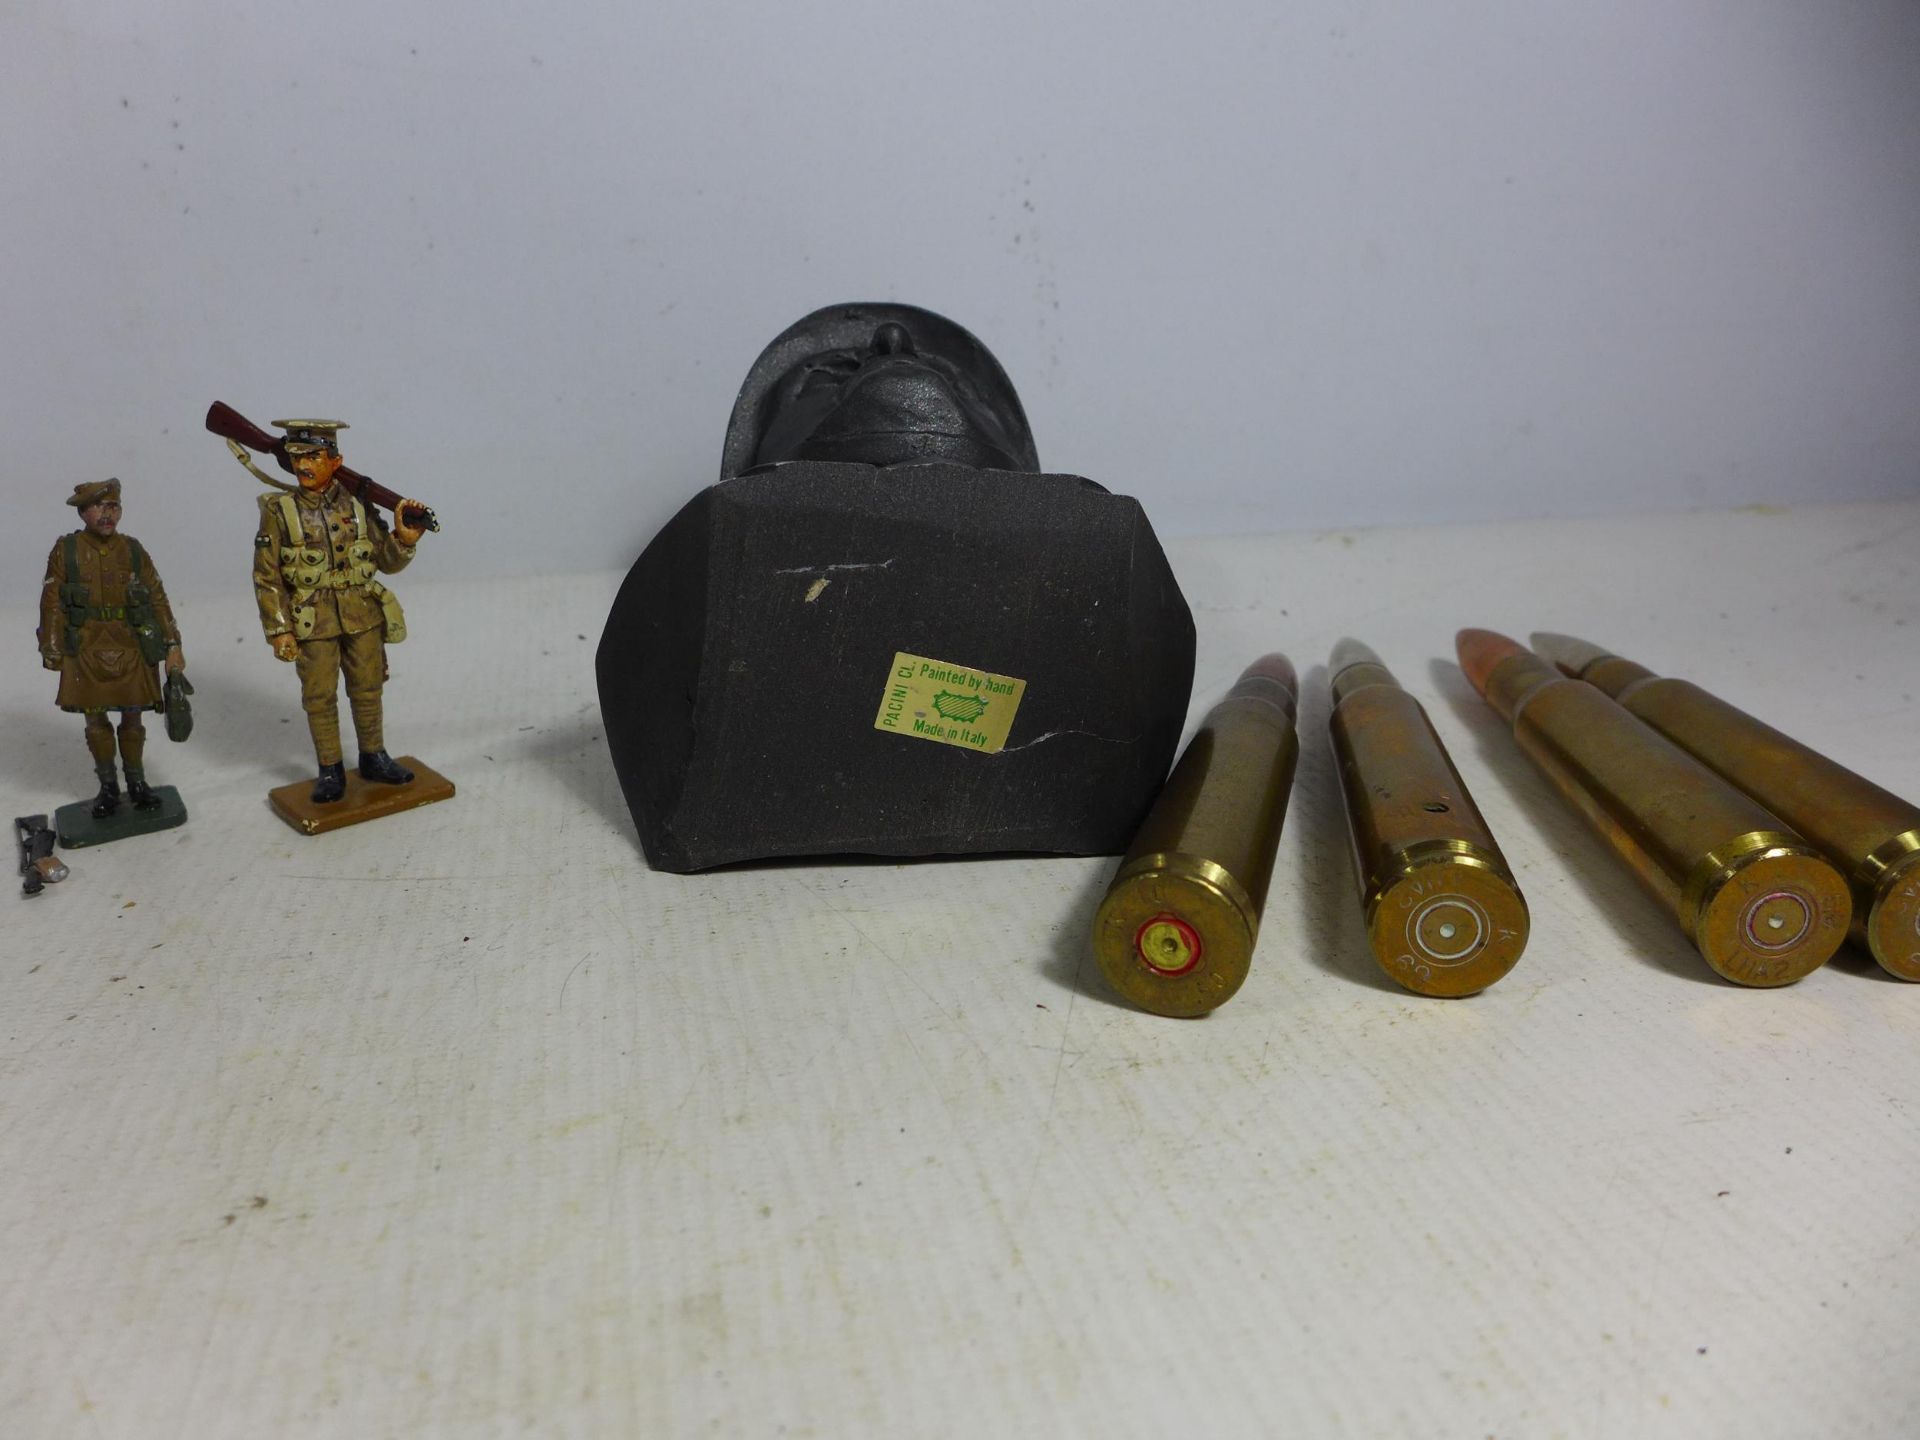 FOUR INERT CANNON SHELLS, TWO MODEL SOLDIERS AND A BUST OF AN ITALIAN SOLDIER - Image 5 of 5